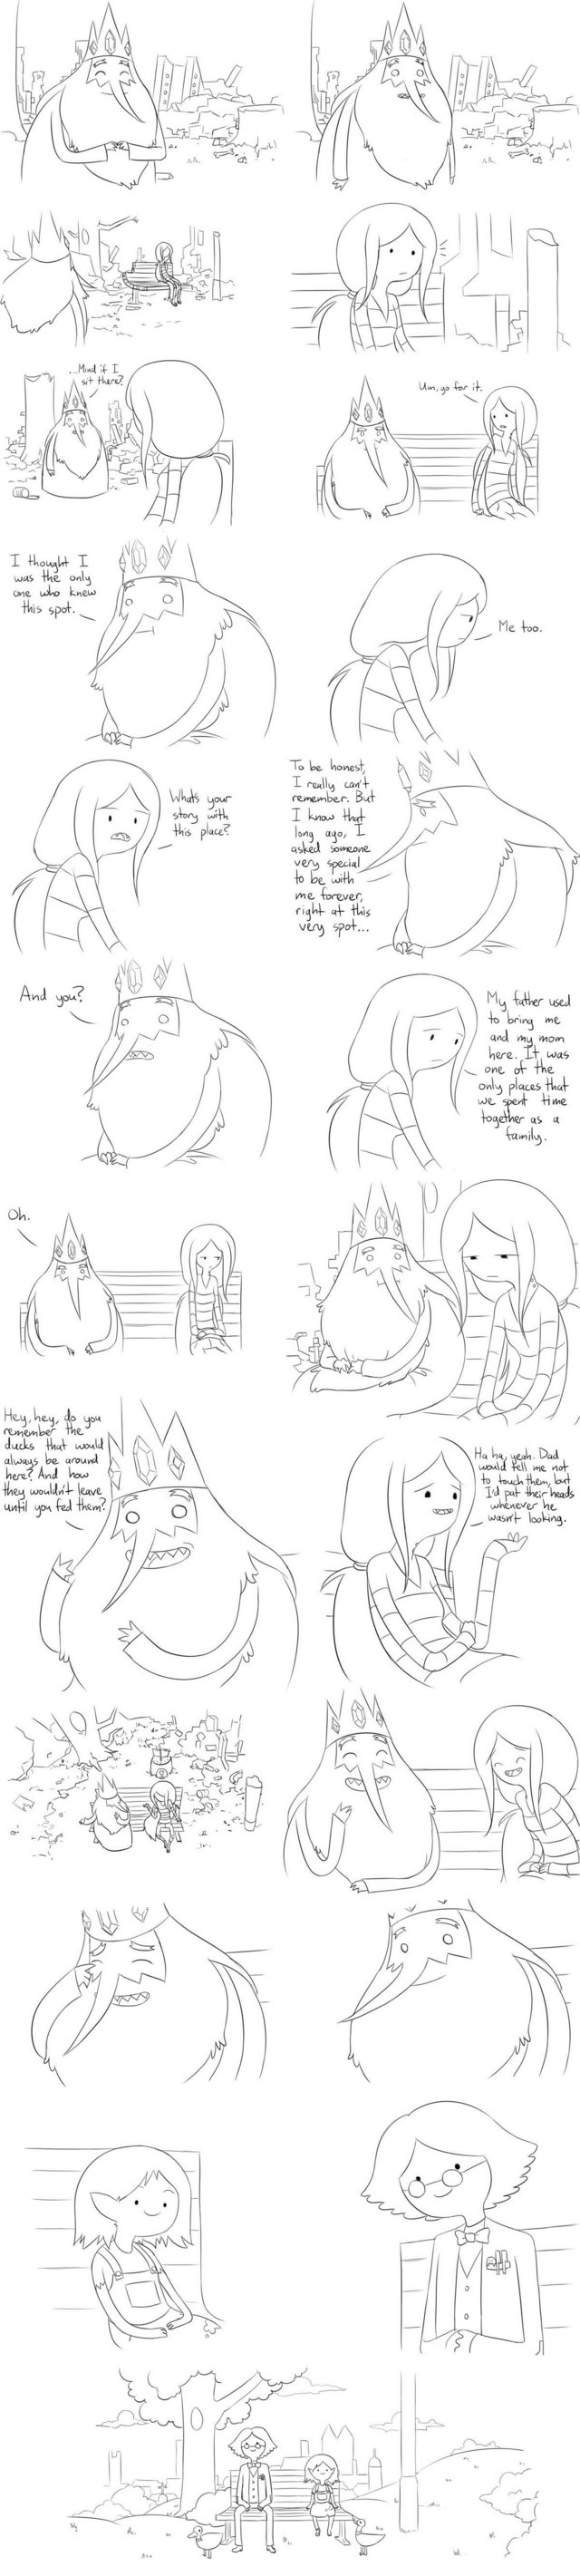 adventure time porn pictures funny time large adventure feel